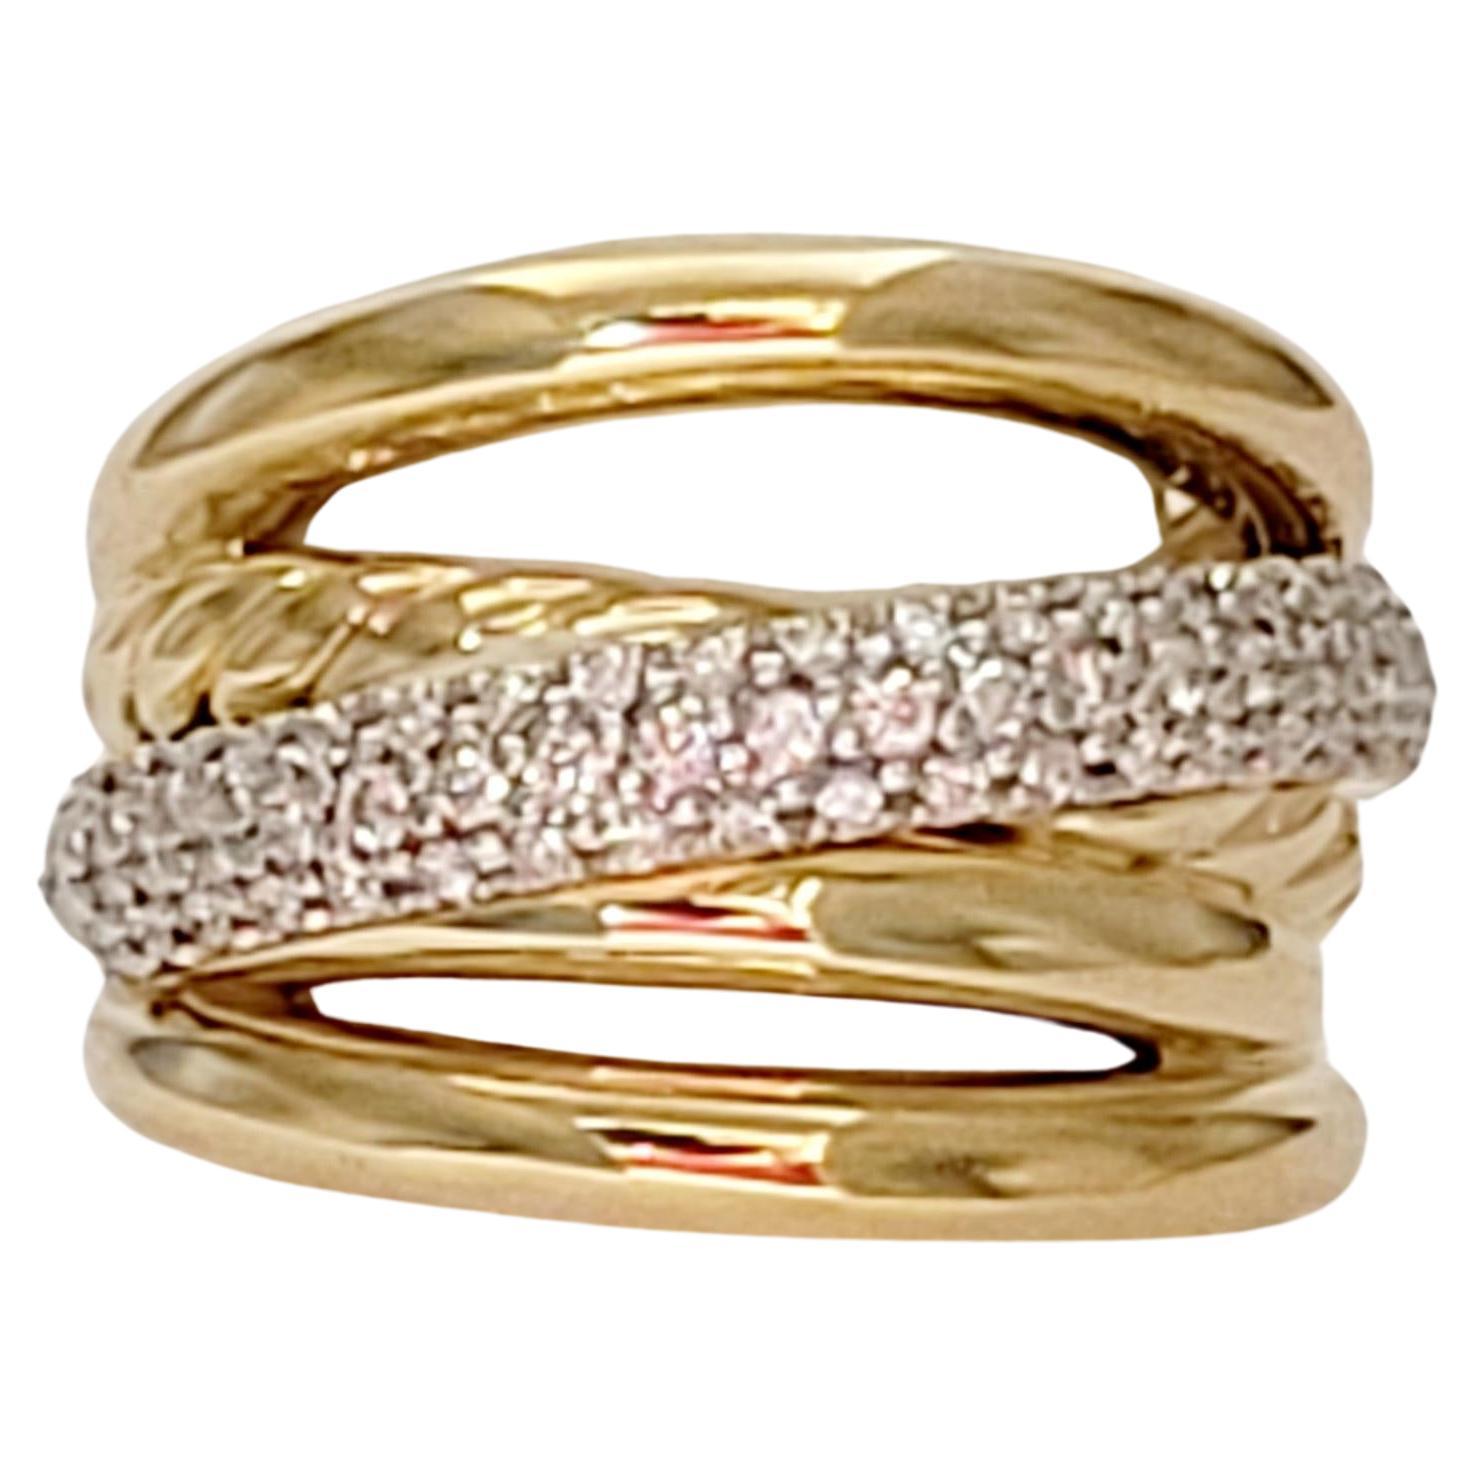 Brand David Yurman
18K Yellow Gold
Pave-set diamonds 0.62 total carat weight
Ring: 17.7mm
Ring Size 9
Weight: 21.6gr 
Condition: New, never worn
Retail Price: $5.925
Comes with David Yurman Ring Box